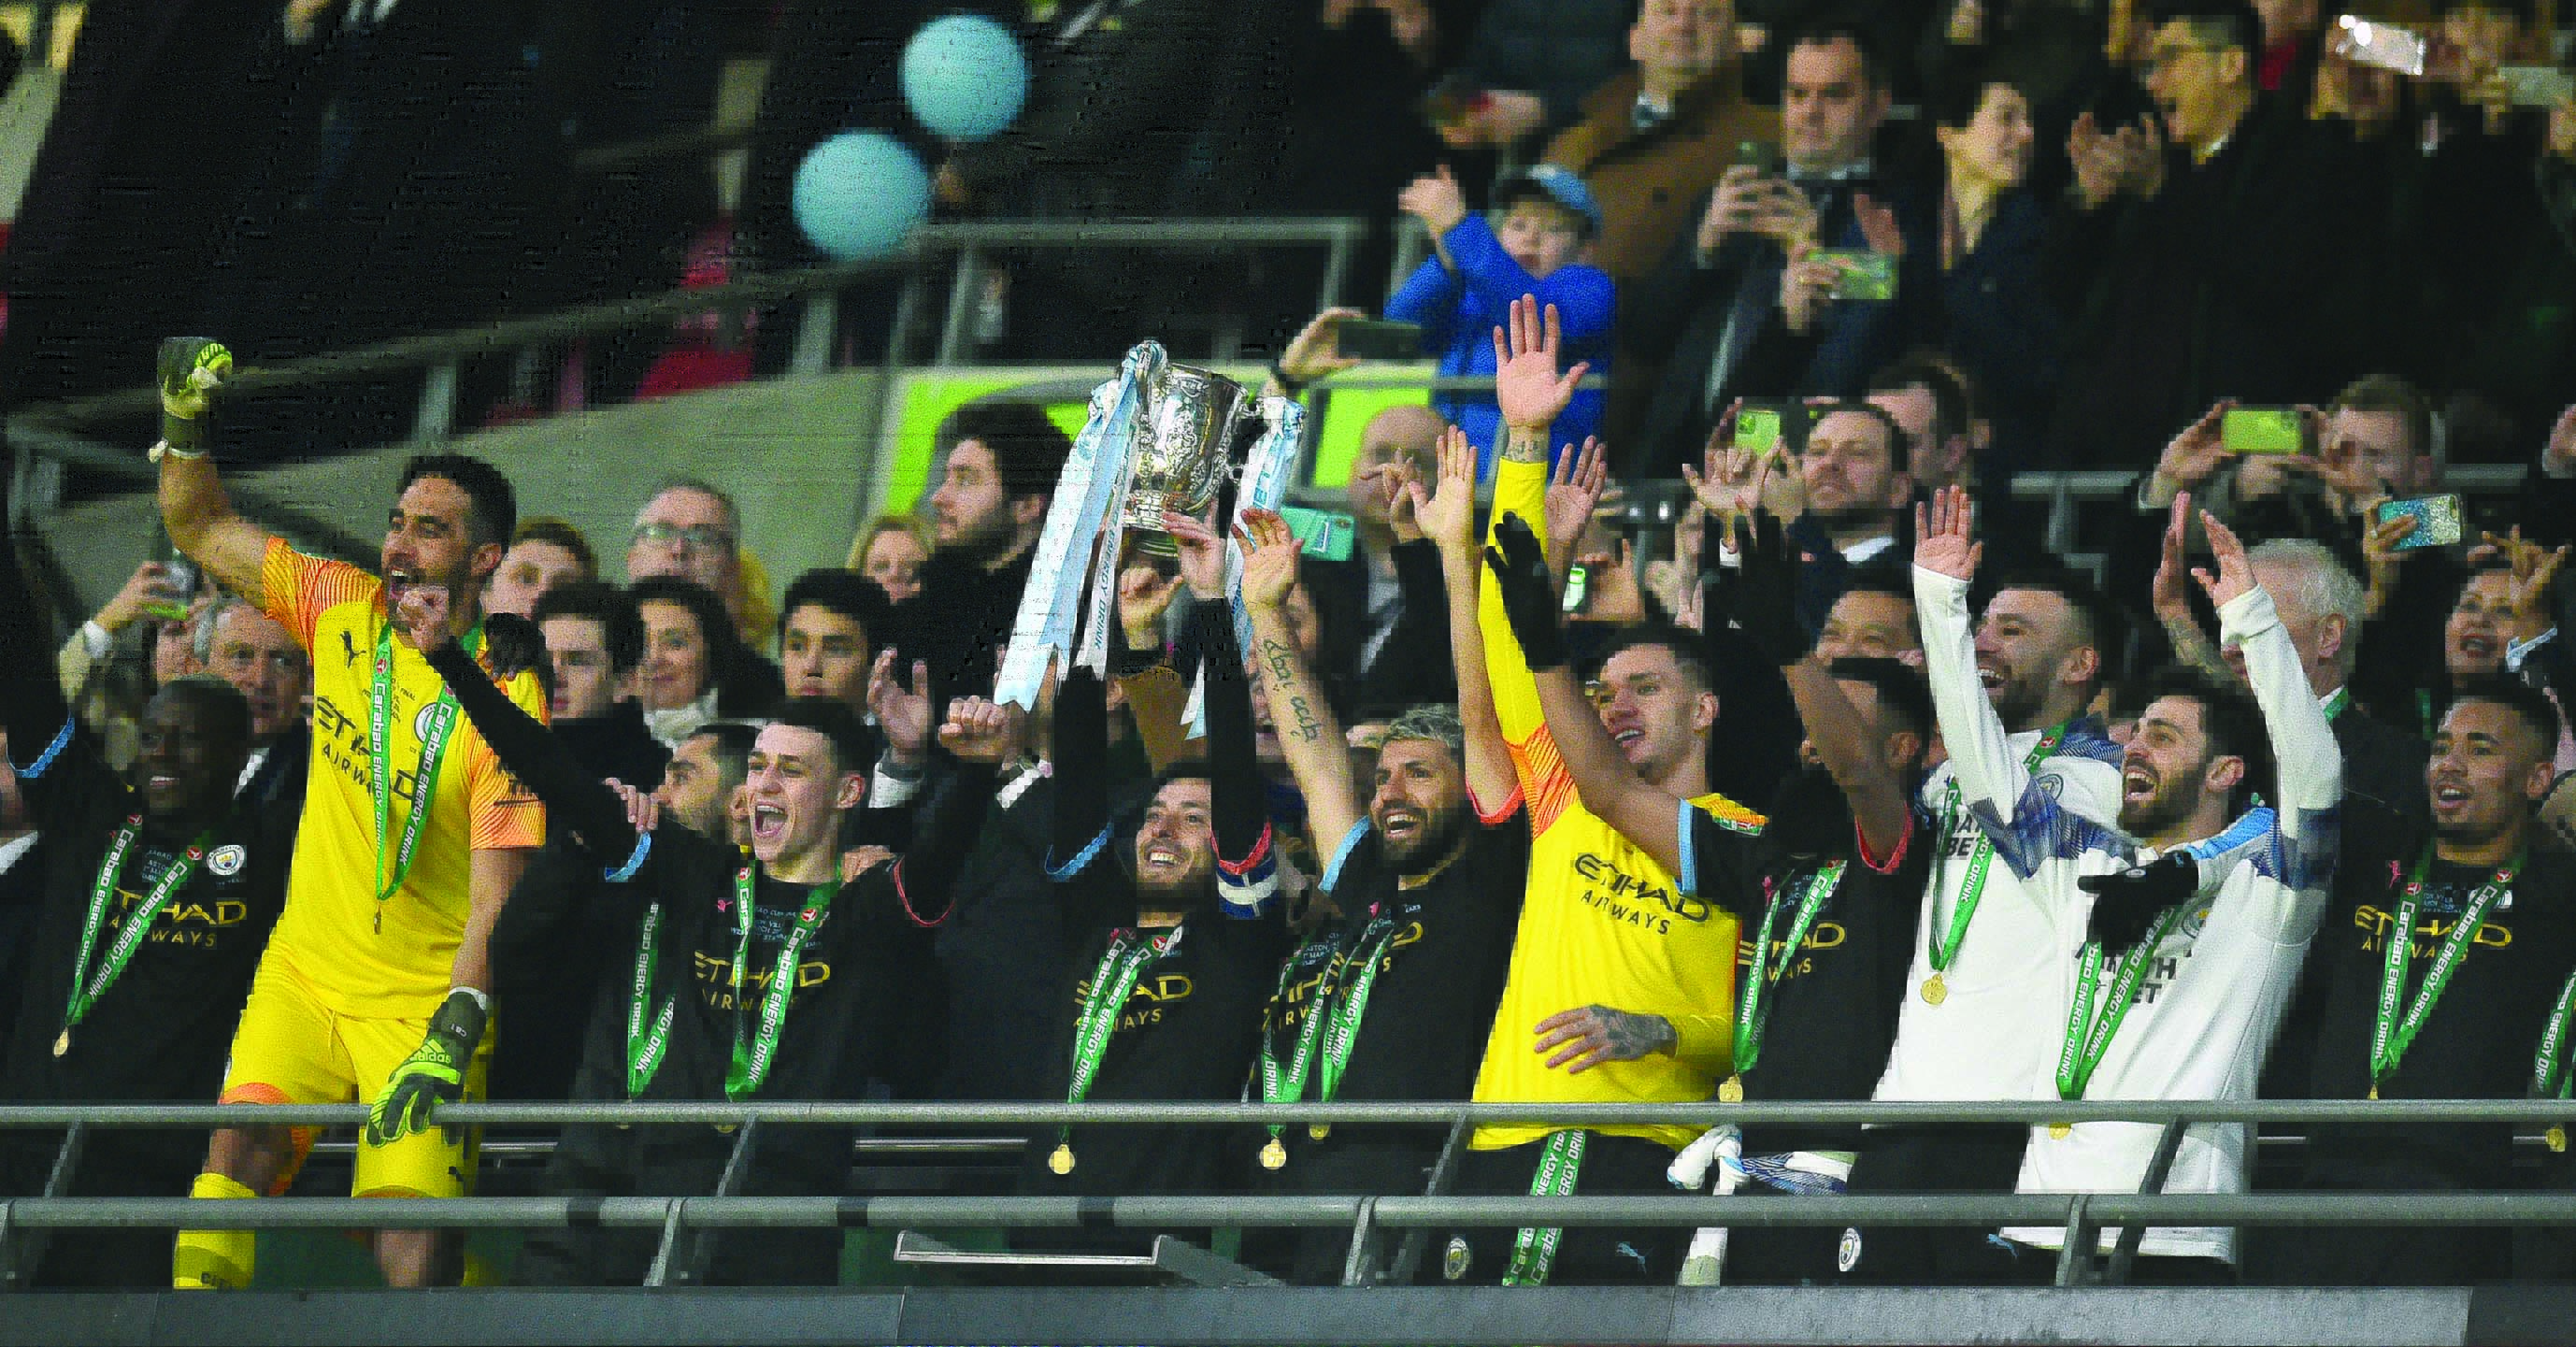 Manchester City captain David Silva lifts the trophy as his teammates celebrate their win after the English League Cup final football match between Aston Villa and Manchester City at Wembley stadium in London on March 1, 2020. - Manchester City won the game 2-1. (Photo by Glyn KIRK / AFP)